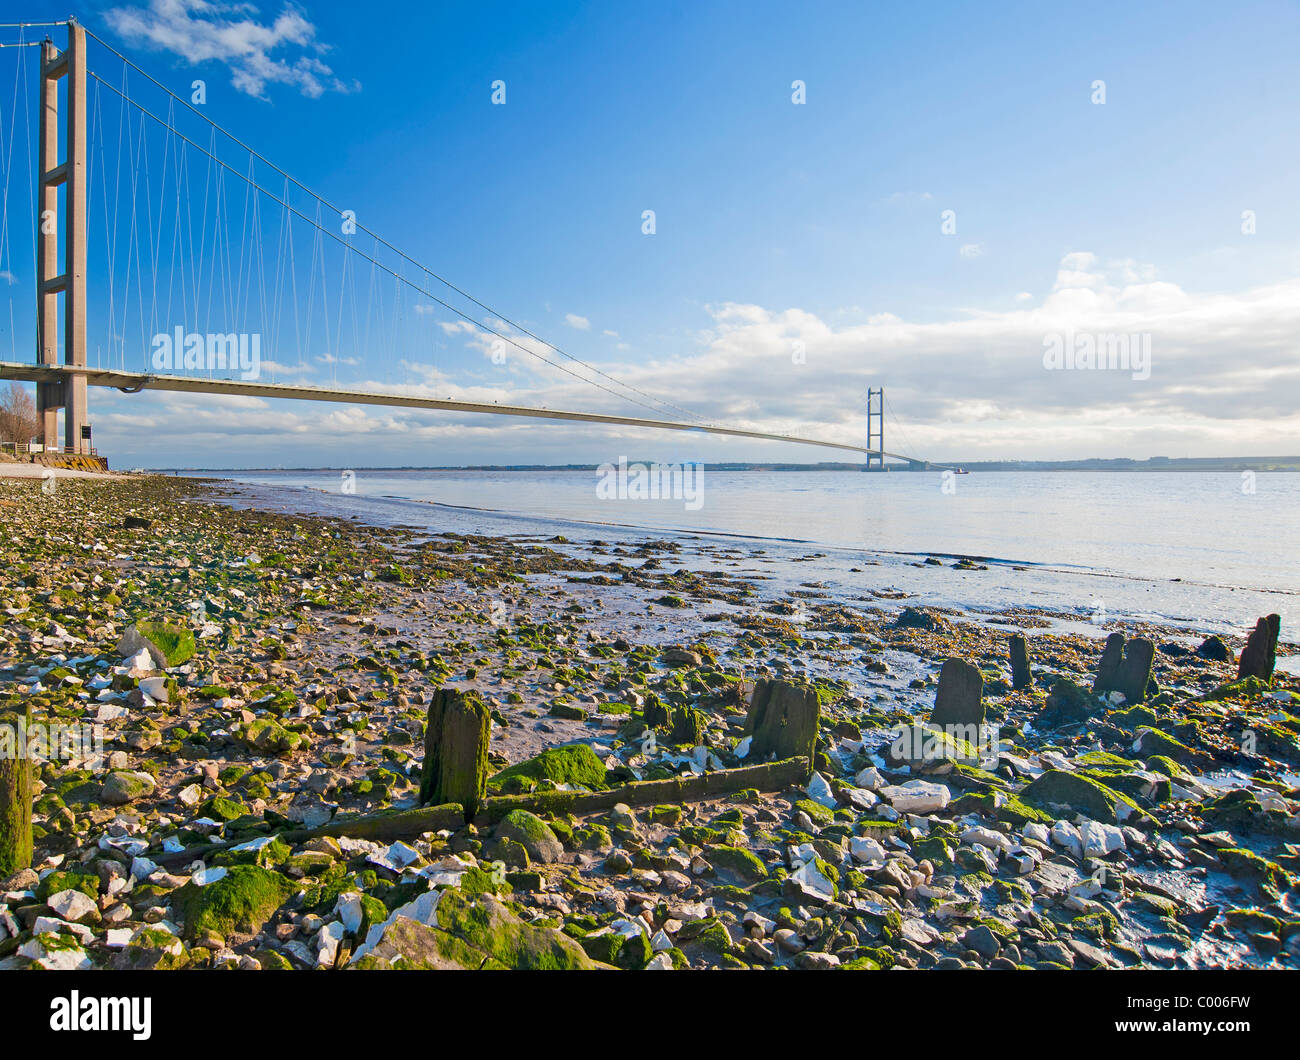 Large suspension bridge spanning a wide river with rocky beach foreground Stock Photo